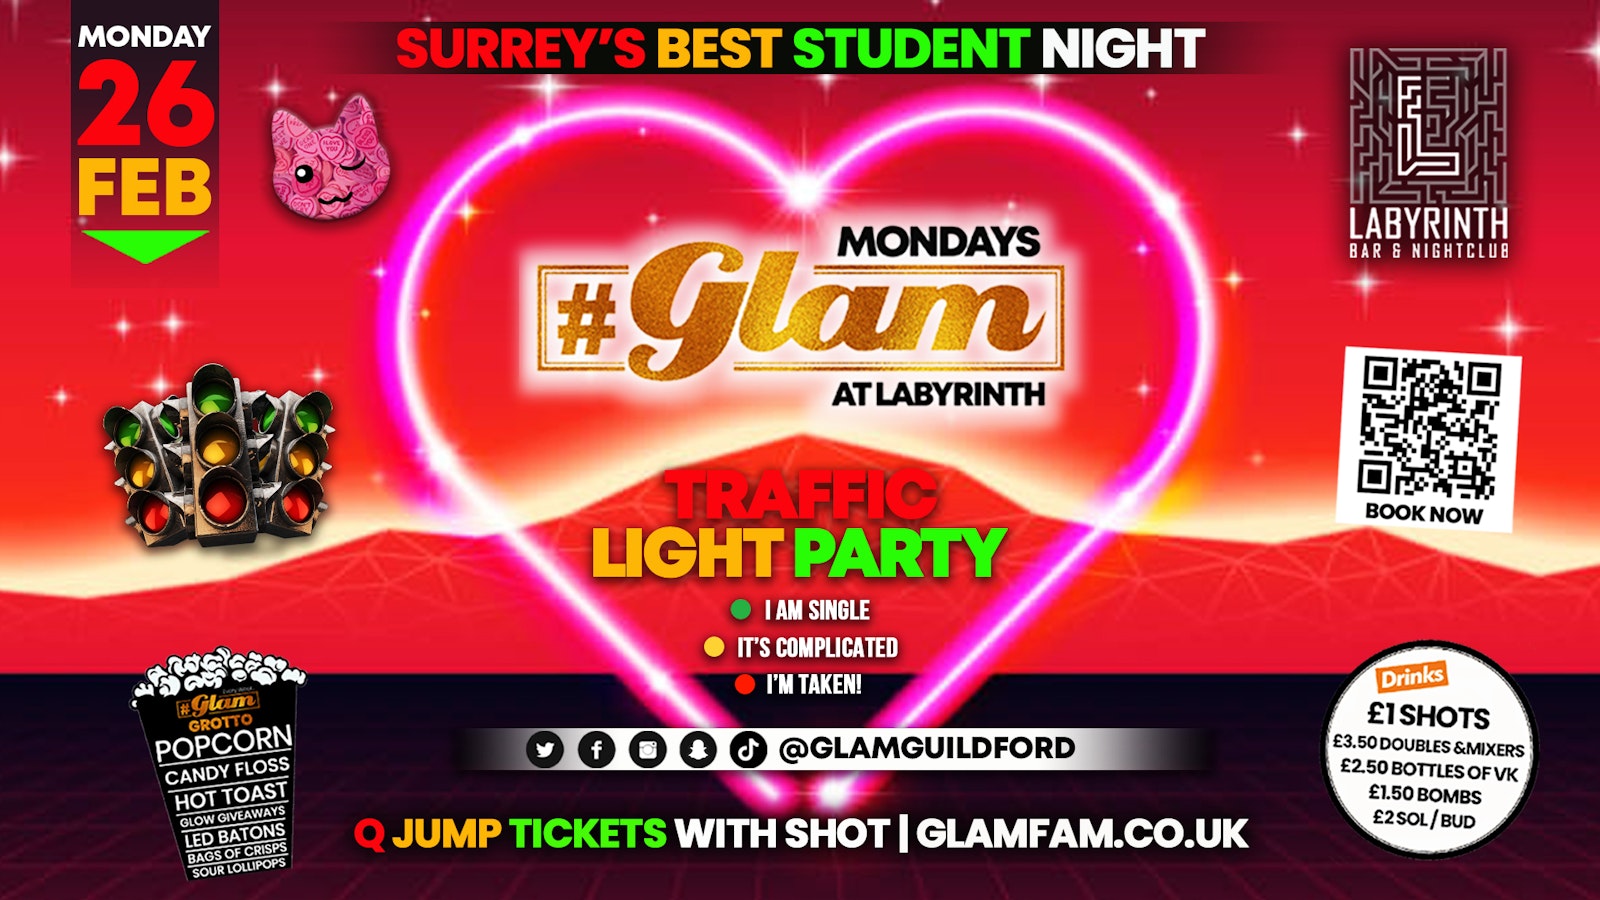 Glam – Surrey’s Best Student Events! Love Traffic Light Party 🚦